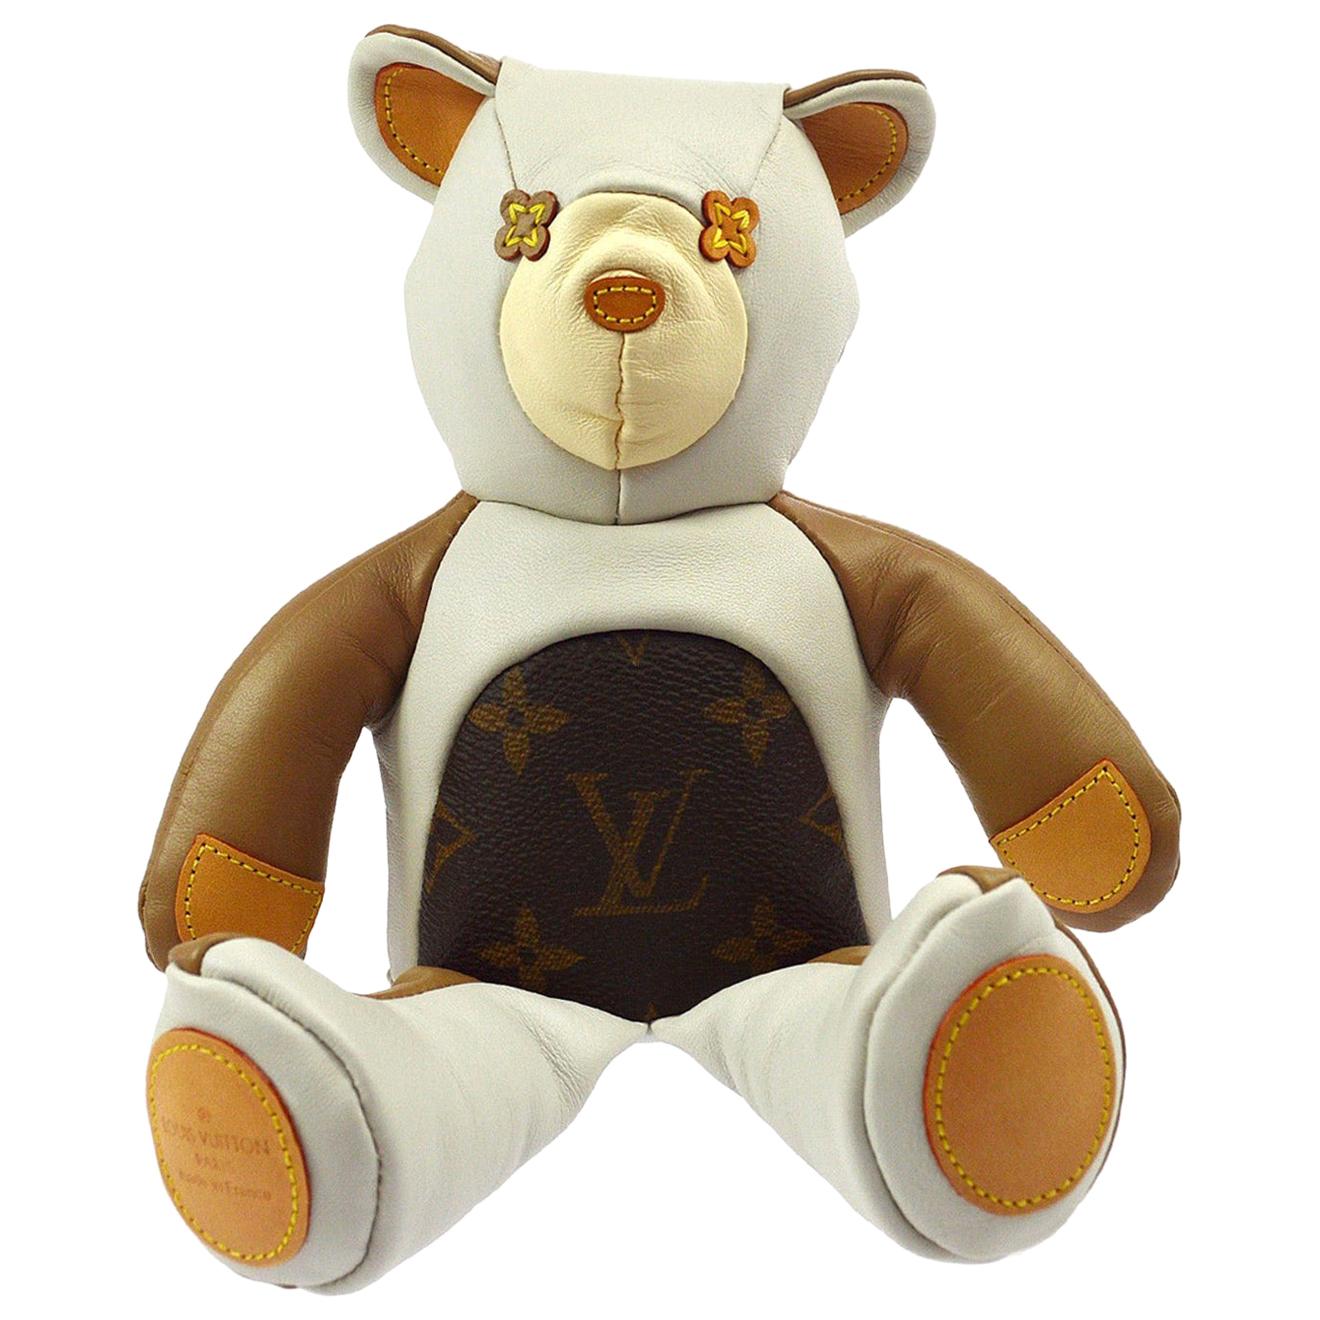 Plush Toy Louis Vuitton France Doudou Teddy Bear Good Condition with  Accessories